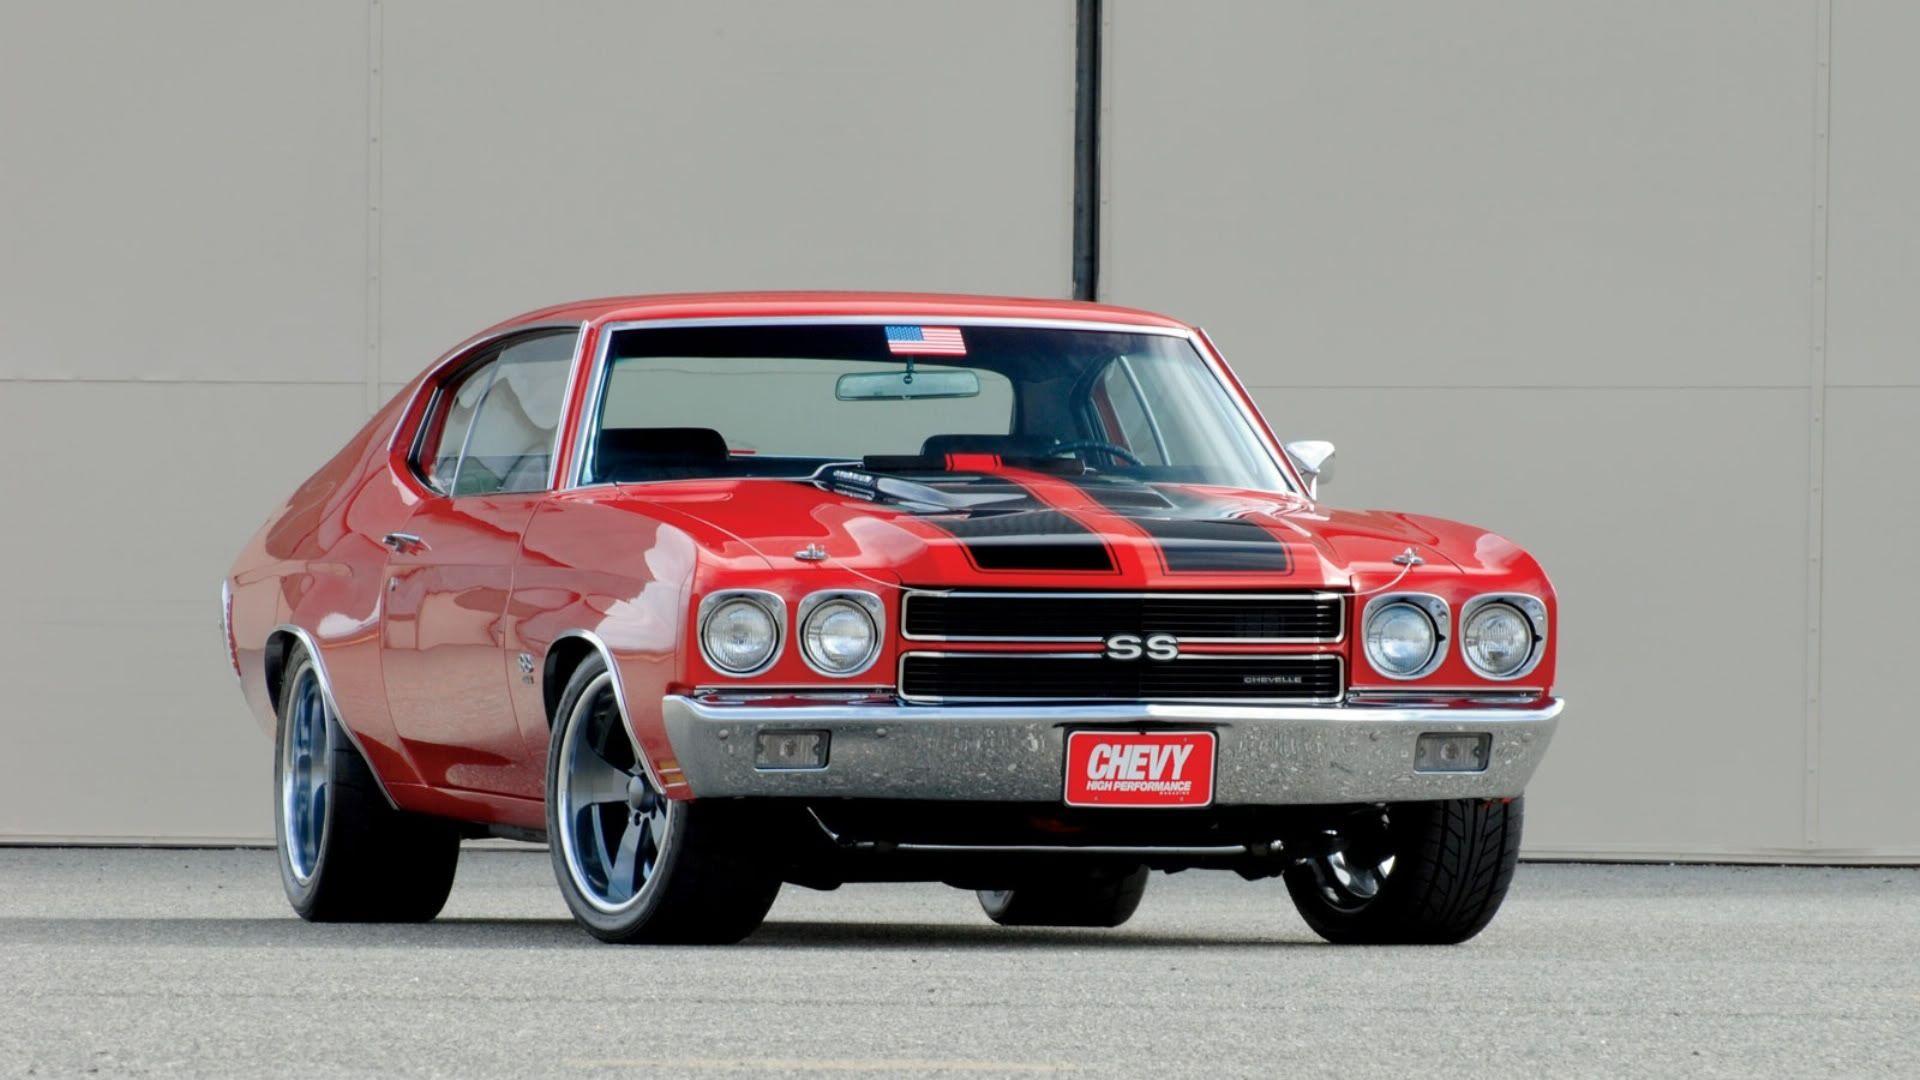 Red Chevy Chevelle SS 454 wallpaperx1080